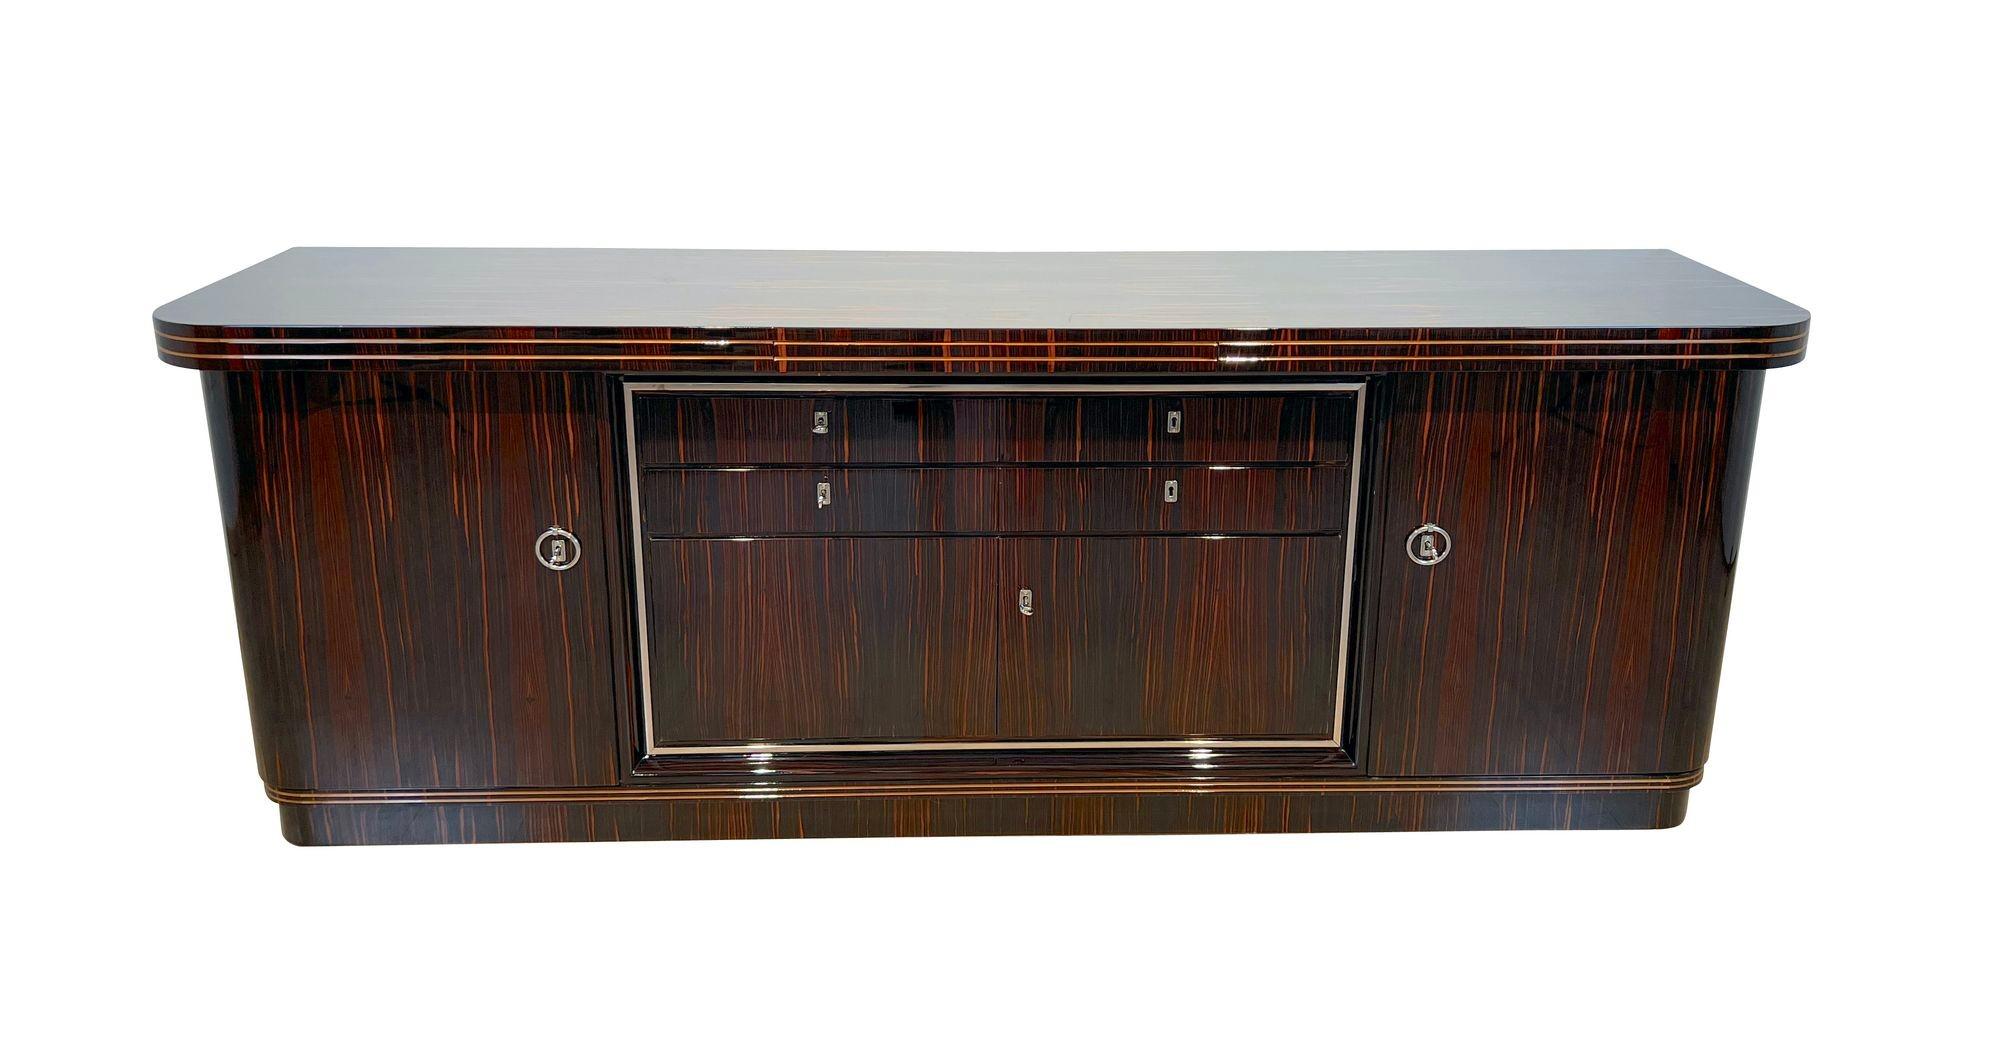 Large original Art Deco Sideboard in Macassar Veneer from France about 1930.
Macassar Veneer, high-gloss lacquered and polished. Maple inlay decorative bands. Original, chrome-plated metal fittings.
Two large doors on the sides and four drawers and